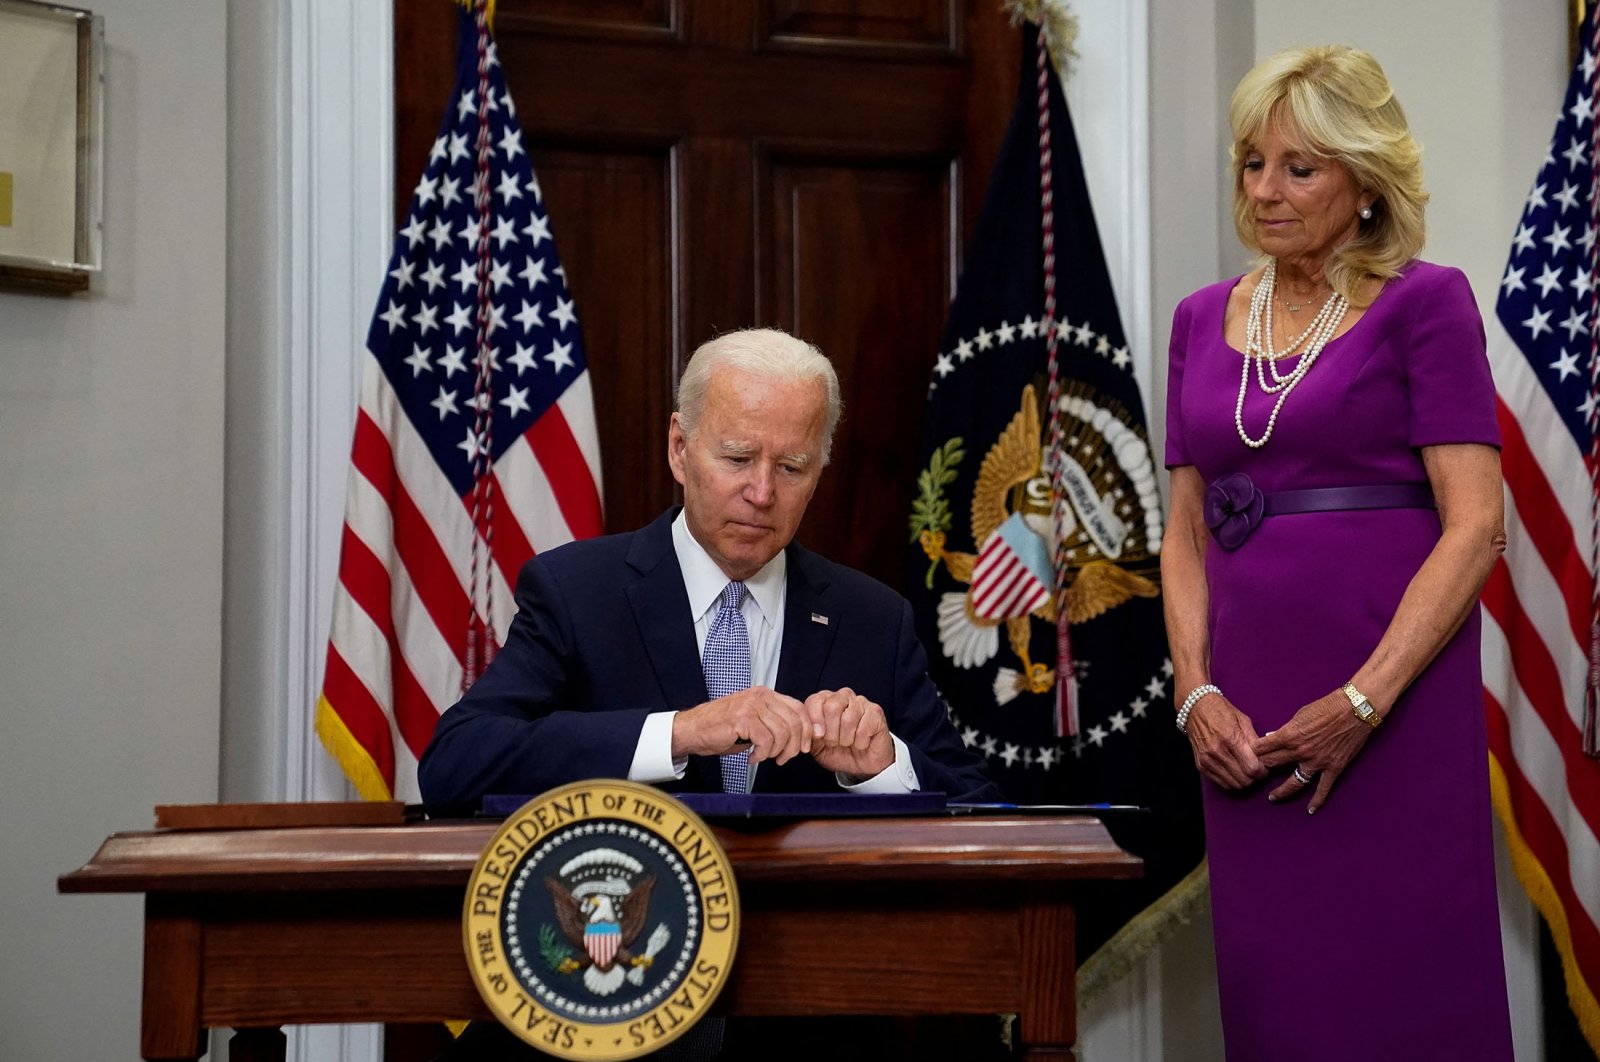 U.S. President Joe Biden prepares to sign a bipartisan federal bill on gun safety into law from the Roosevelt Room at the White House, in Washington, U.S., June 25, 2022. (Reuters Photo)